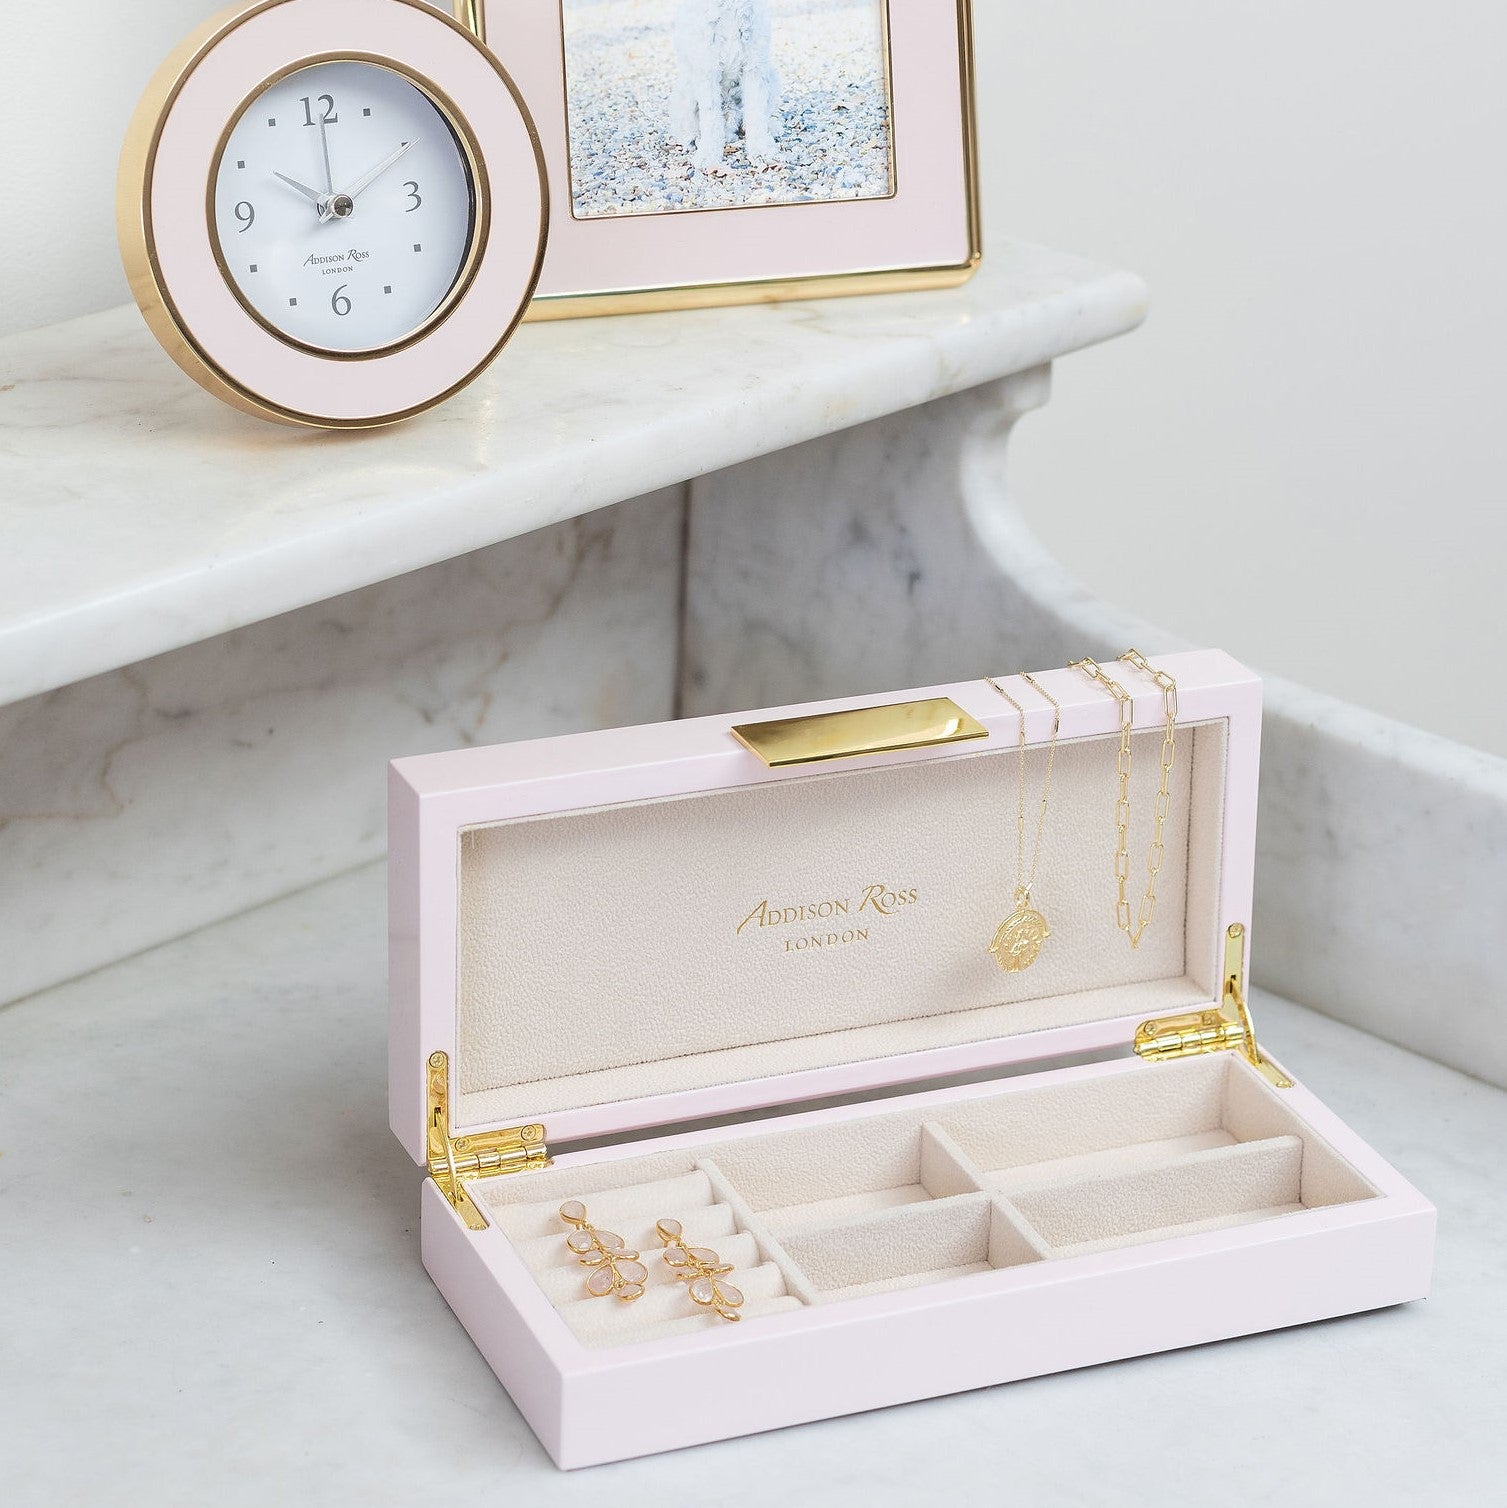 Addison Ross Shagreen Lacquer Box with Gold - Pink.